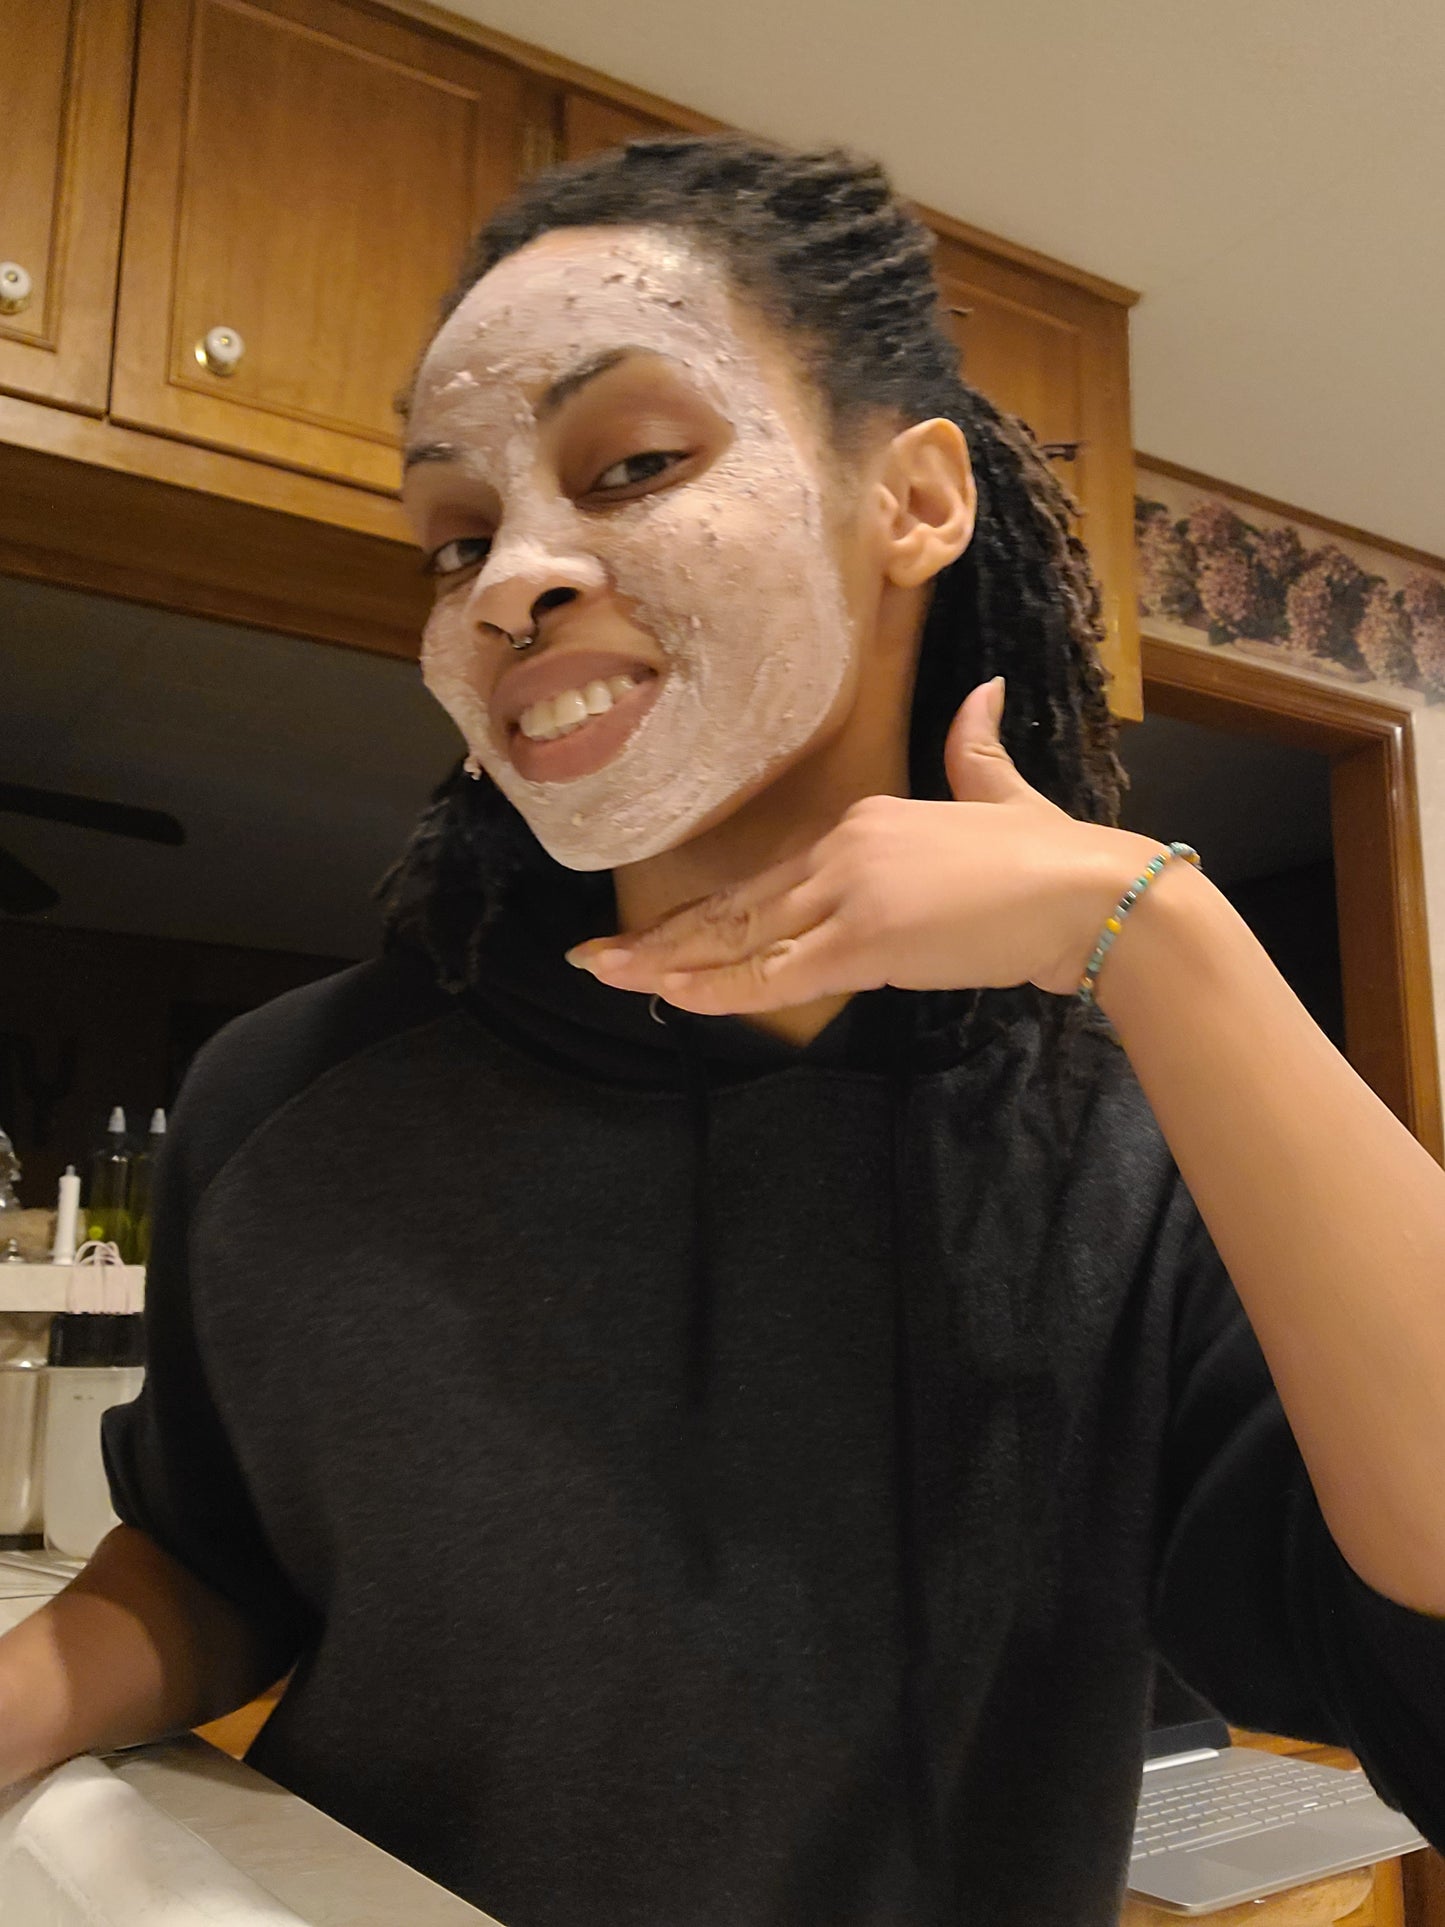 Herbal Face Mask